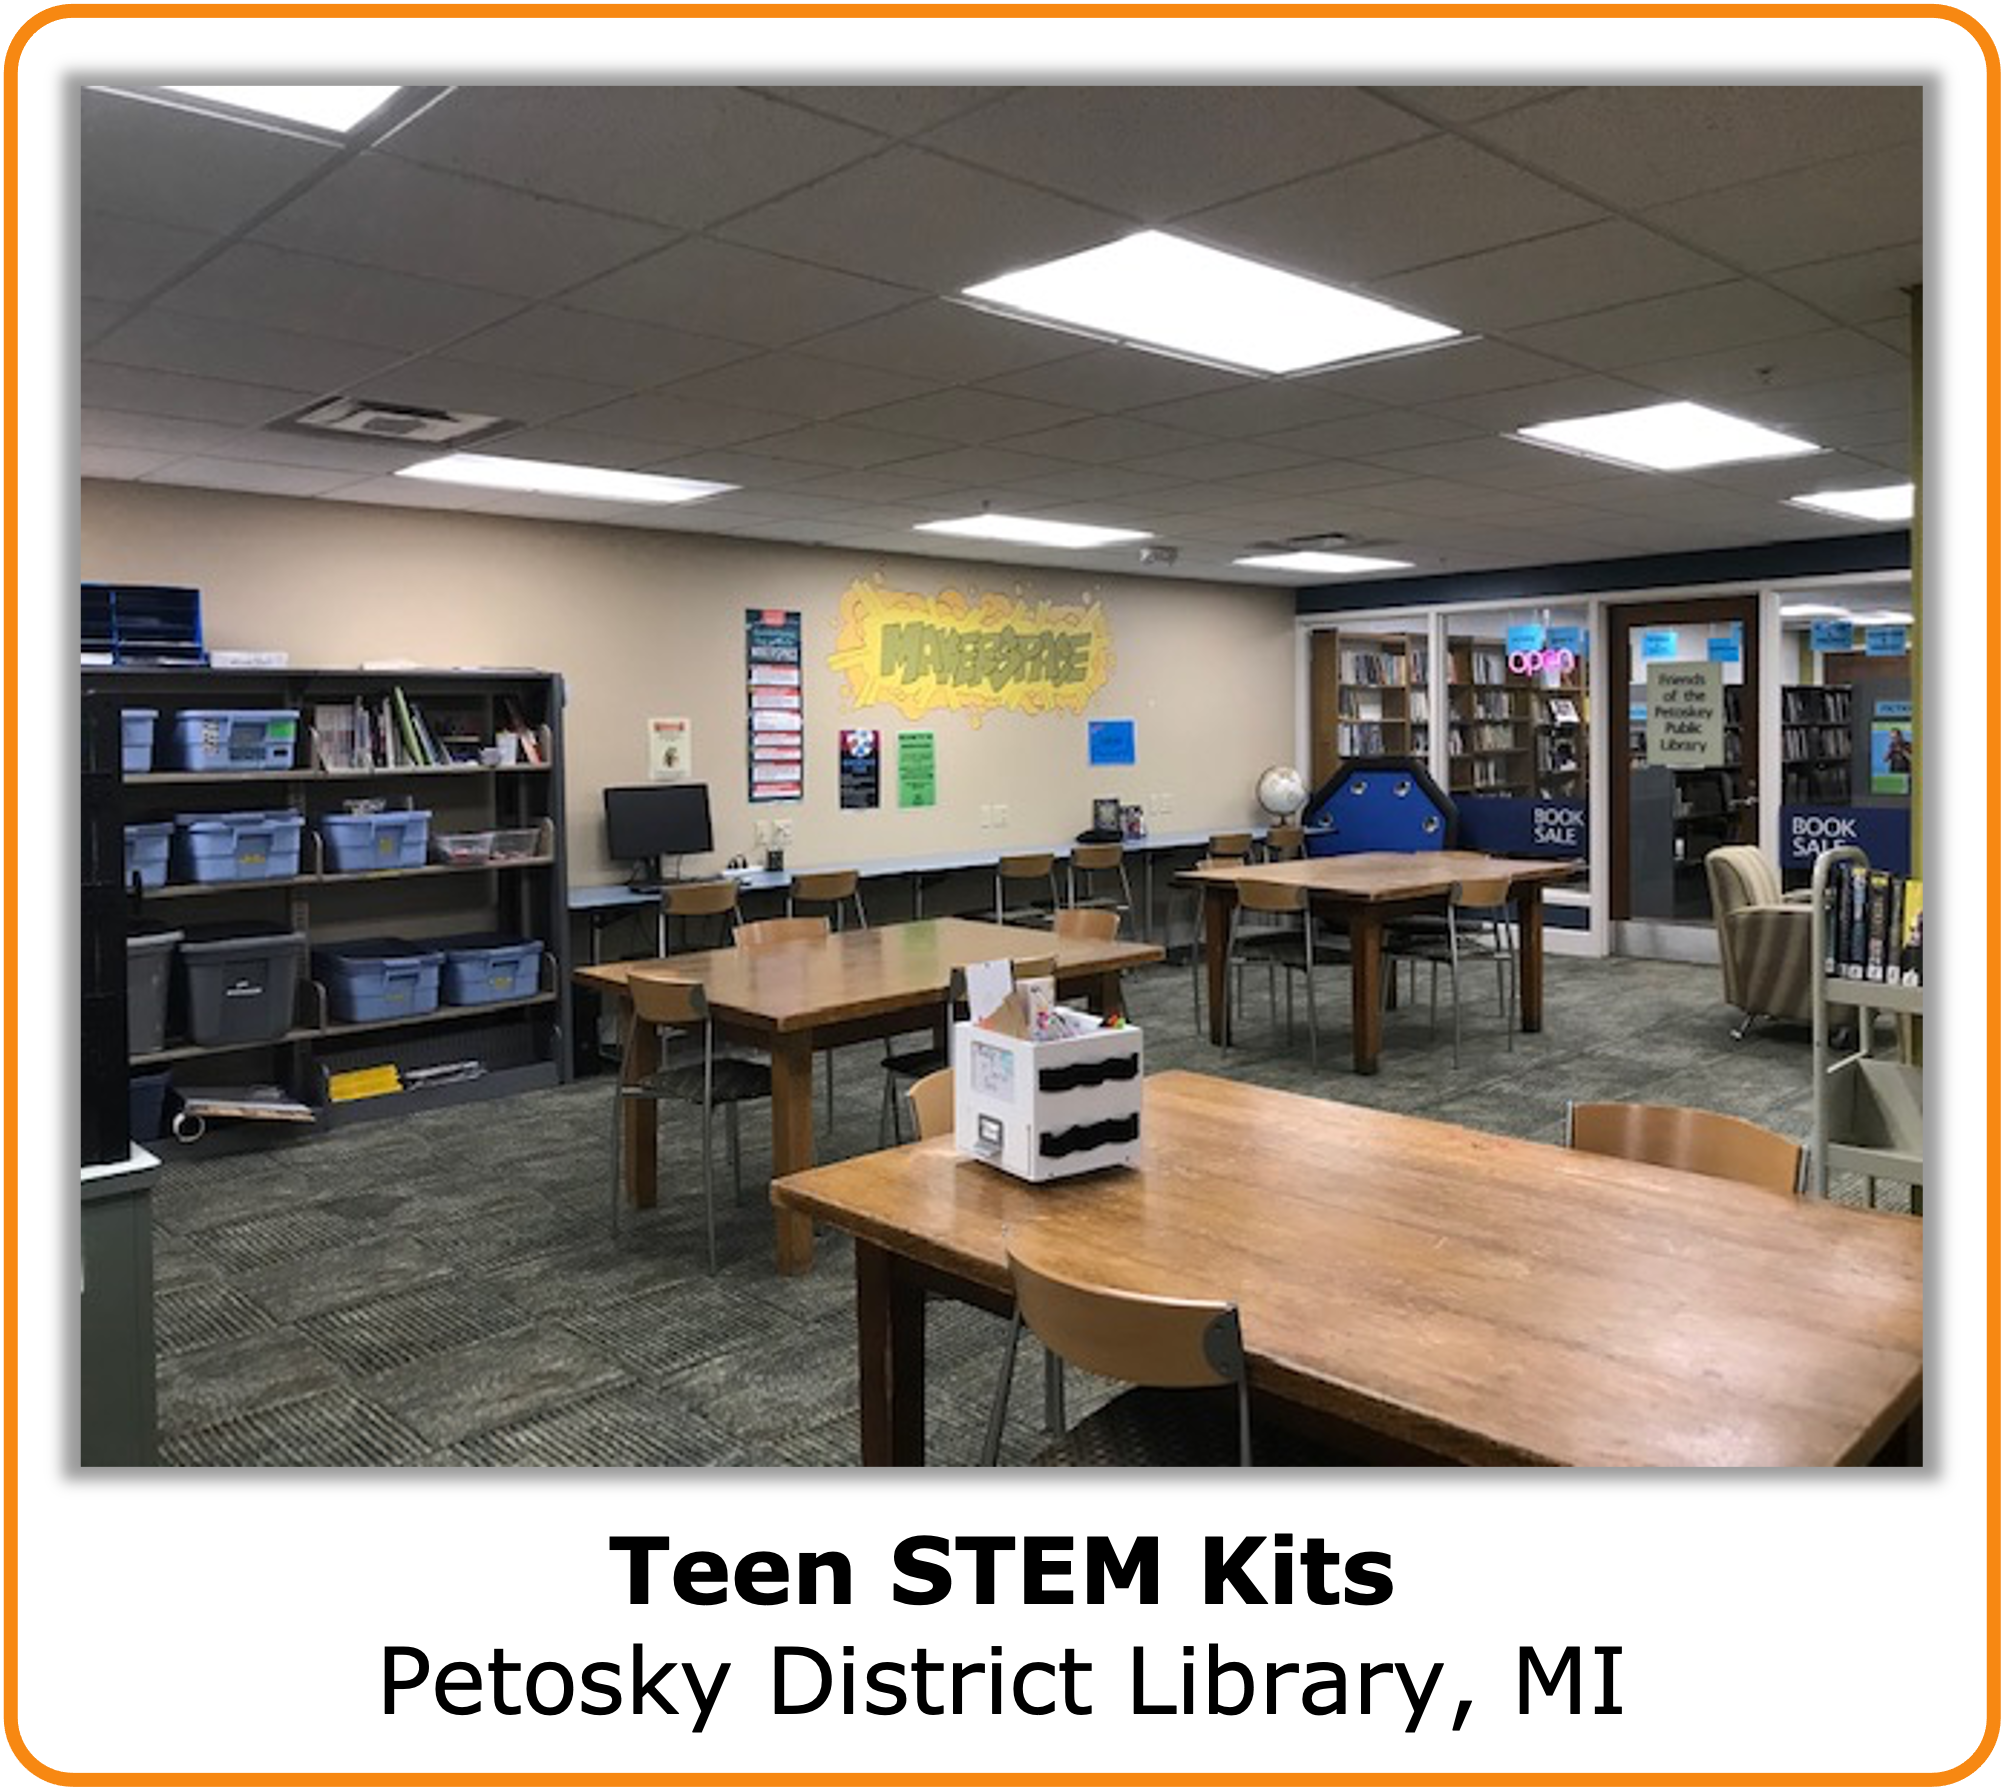 Click to open the case study of the teen STEM kits program at Petoskey District Library in Michigan.